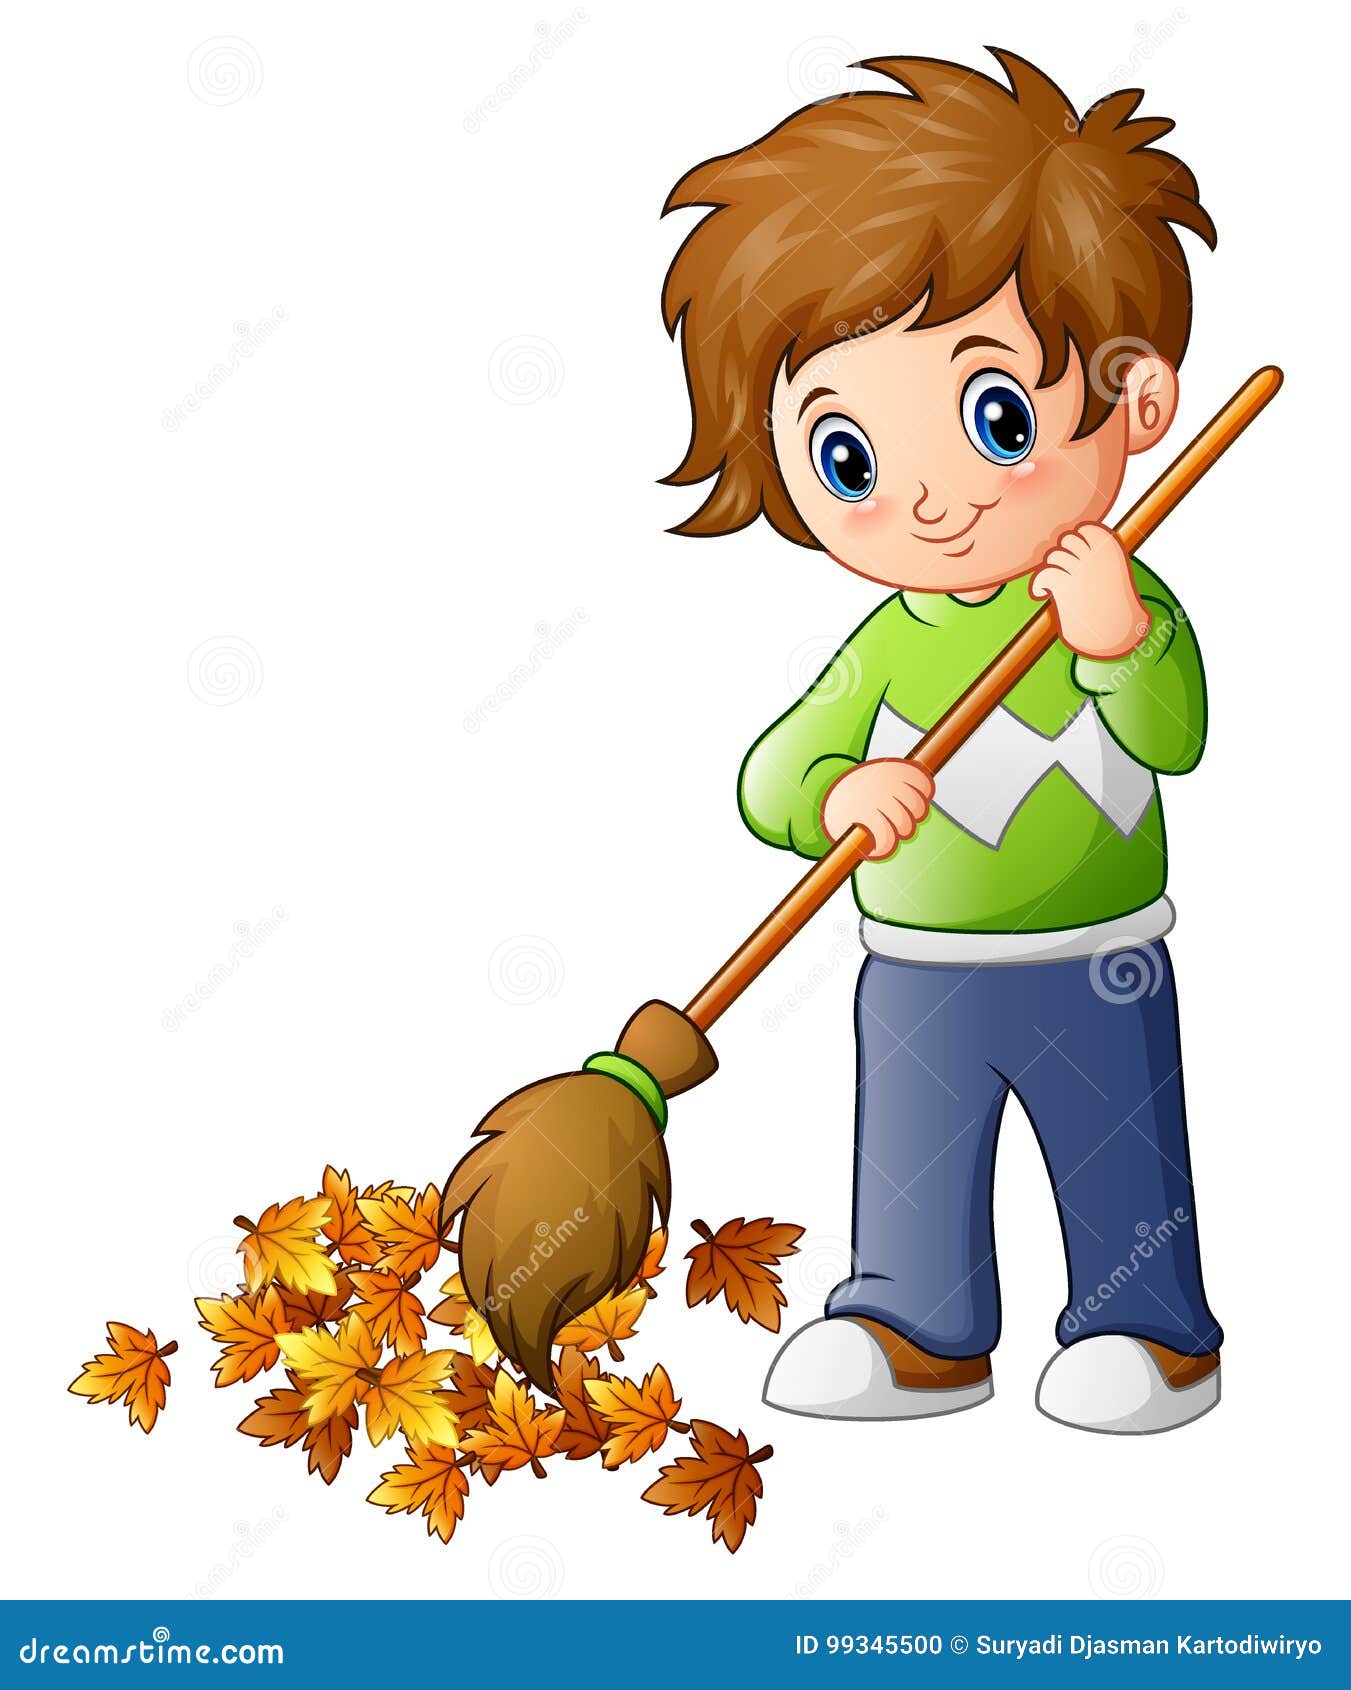 Cartoon Boy with Broom and Autumn Leaves Stock Vector - Illustration of ...